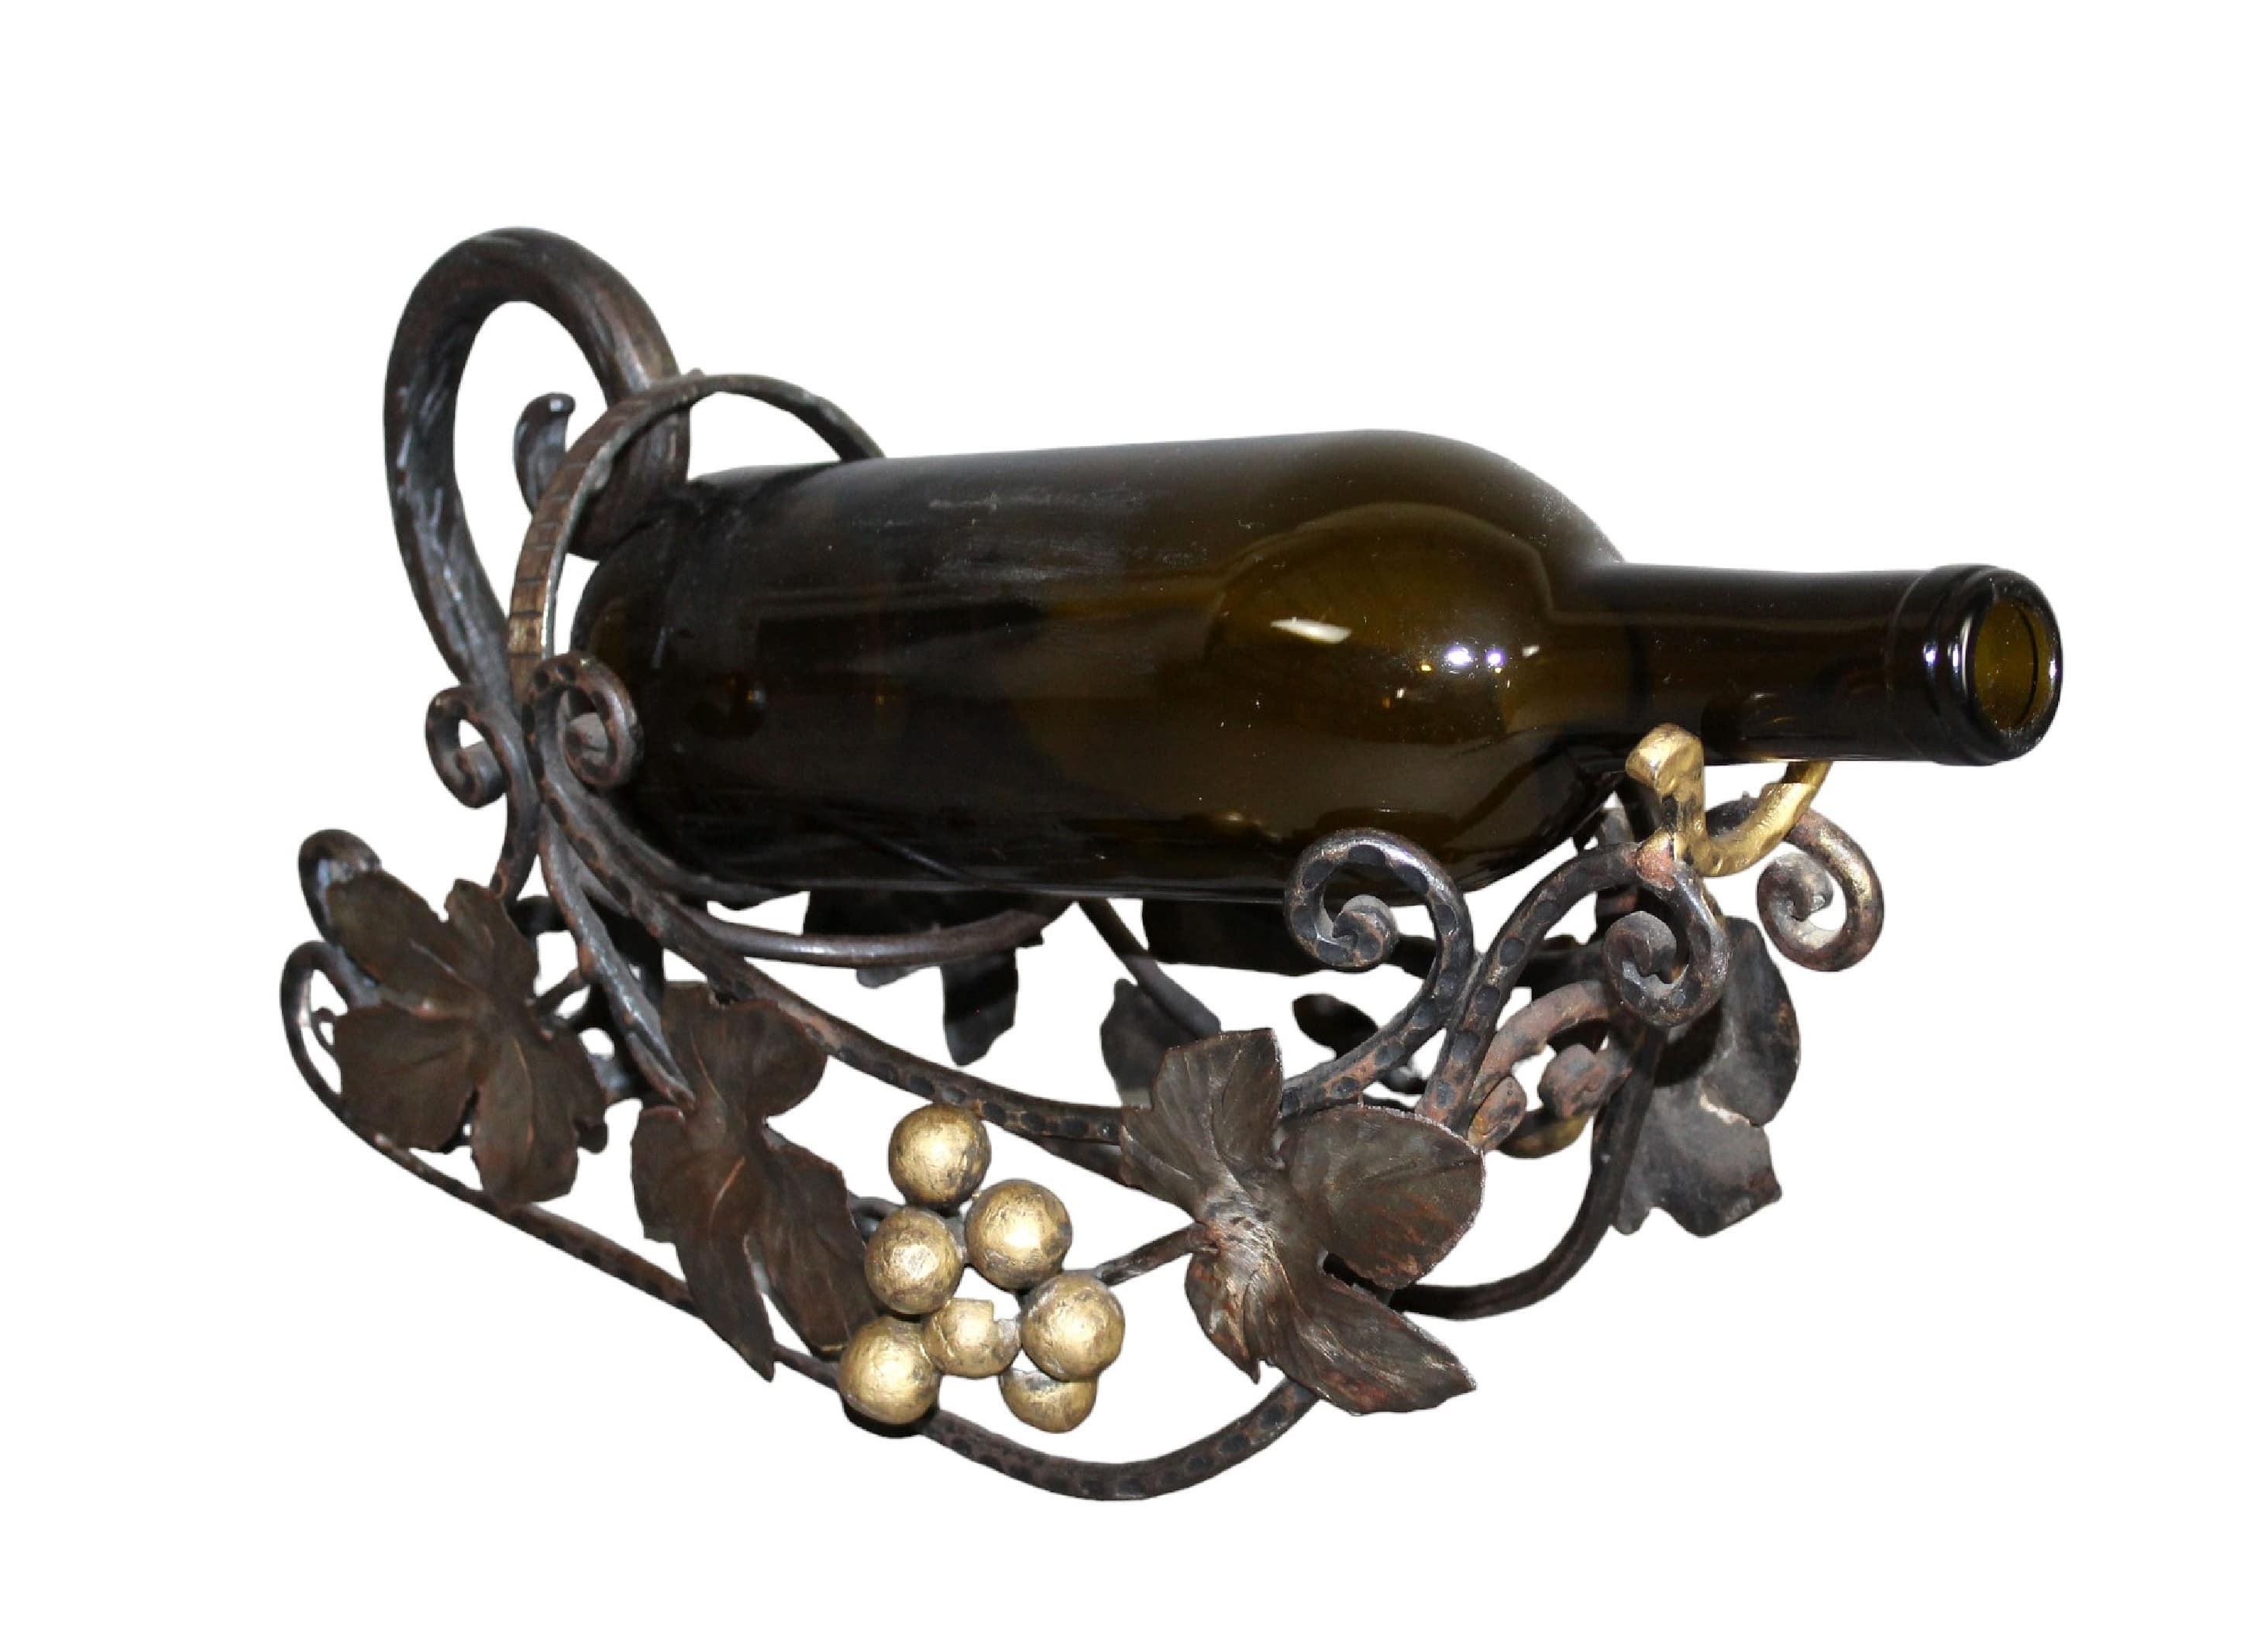 French worught iron wine bottle caddy